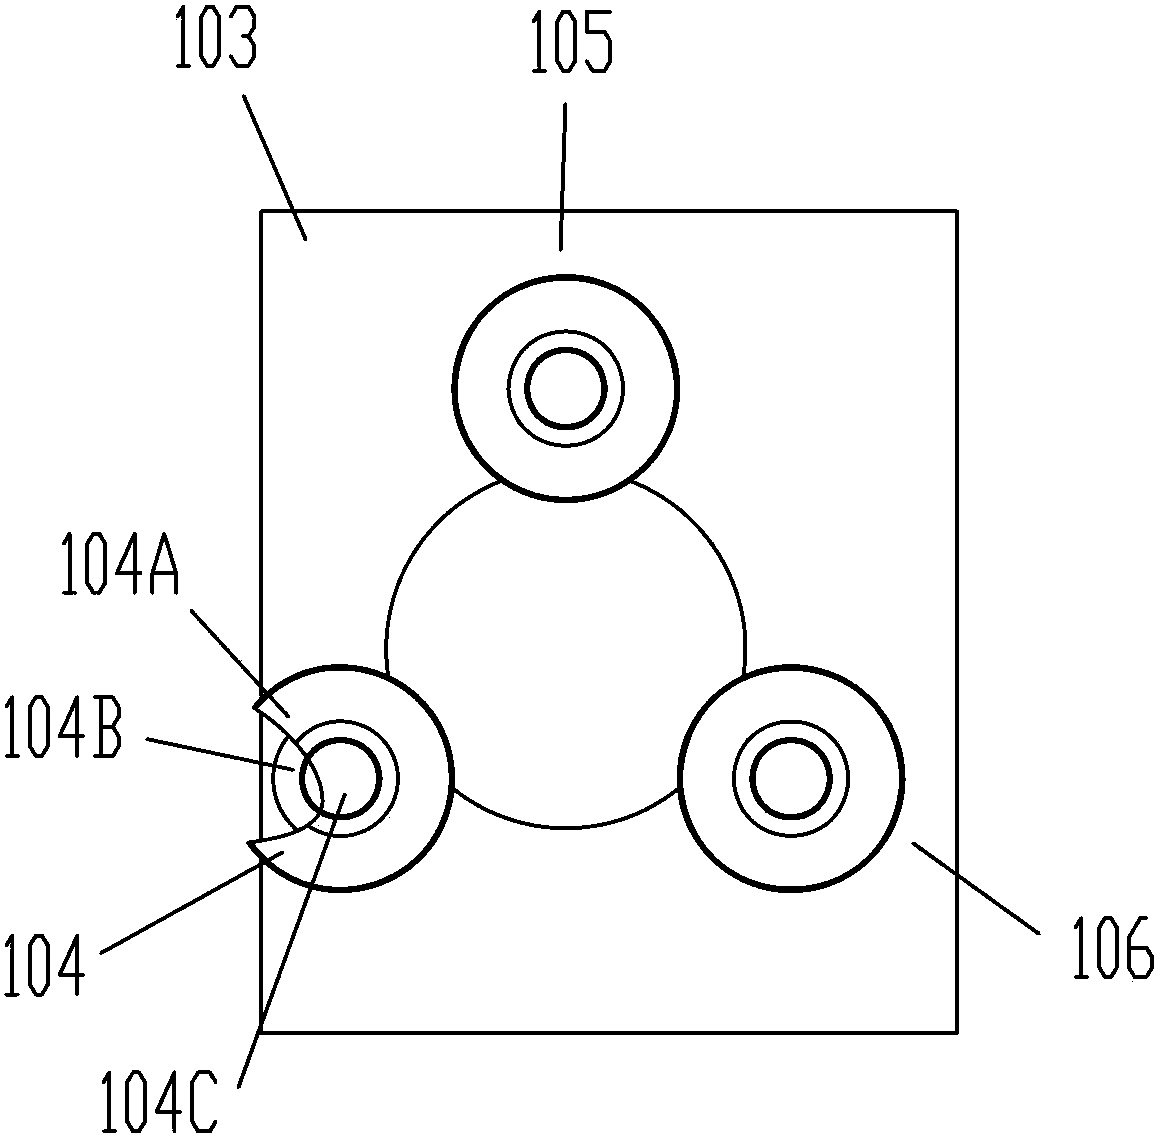 Mechanism for adjusting rotation directions and rotation speeds of inner ring and outer ring of rotation bearing